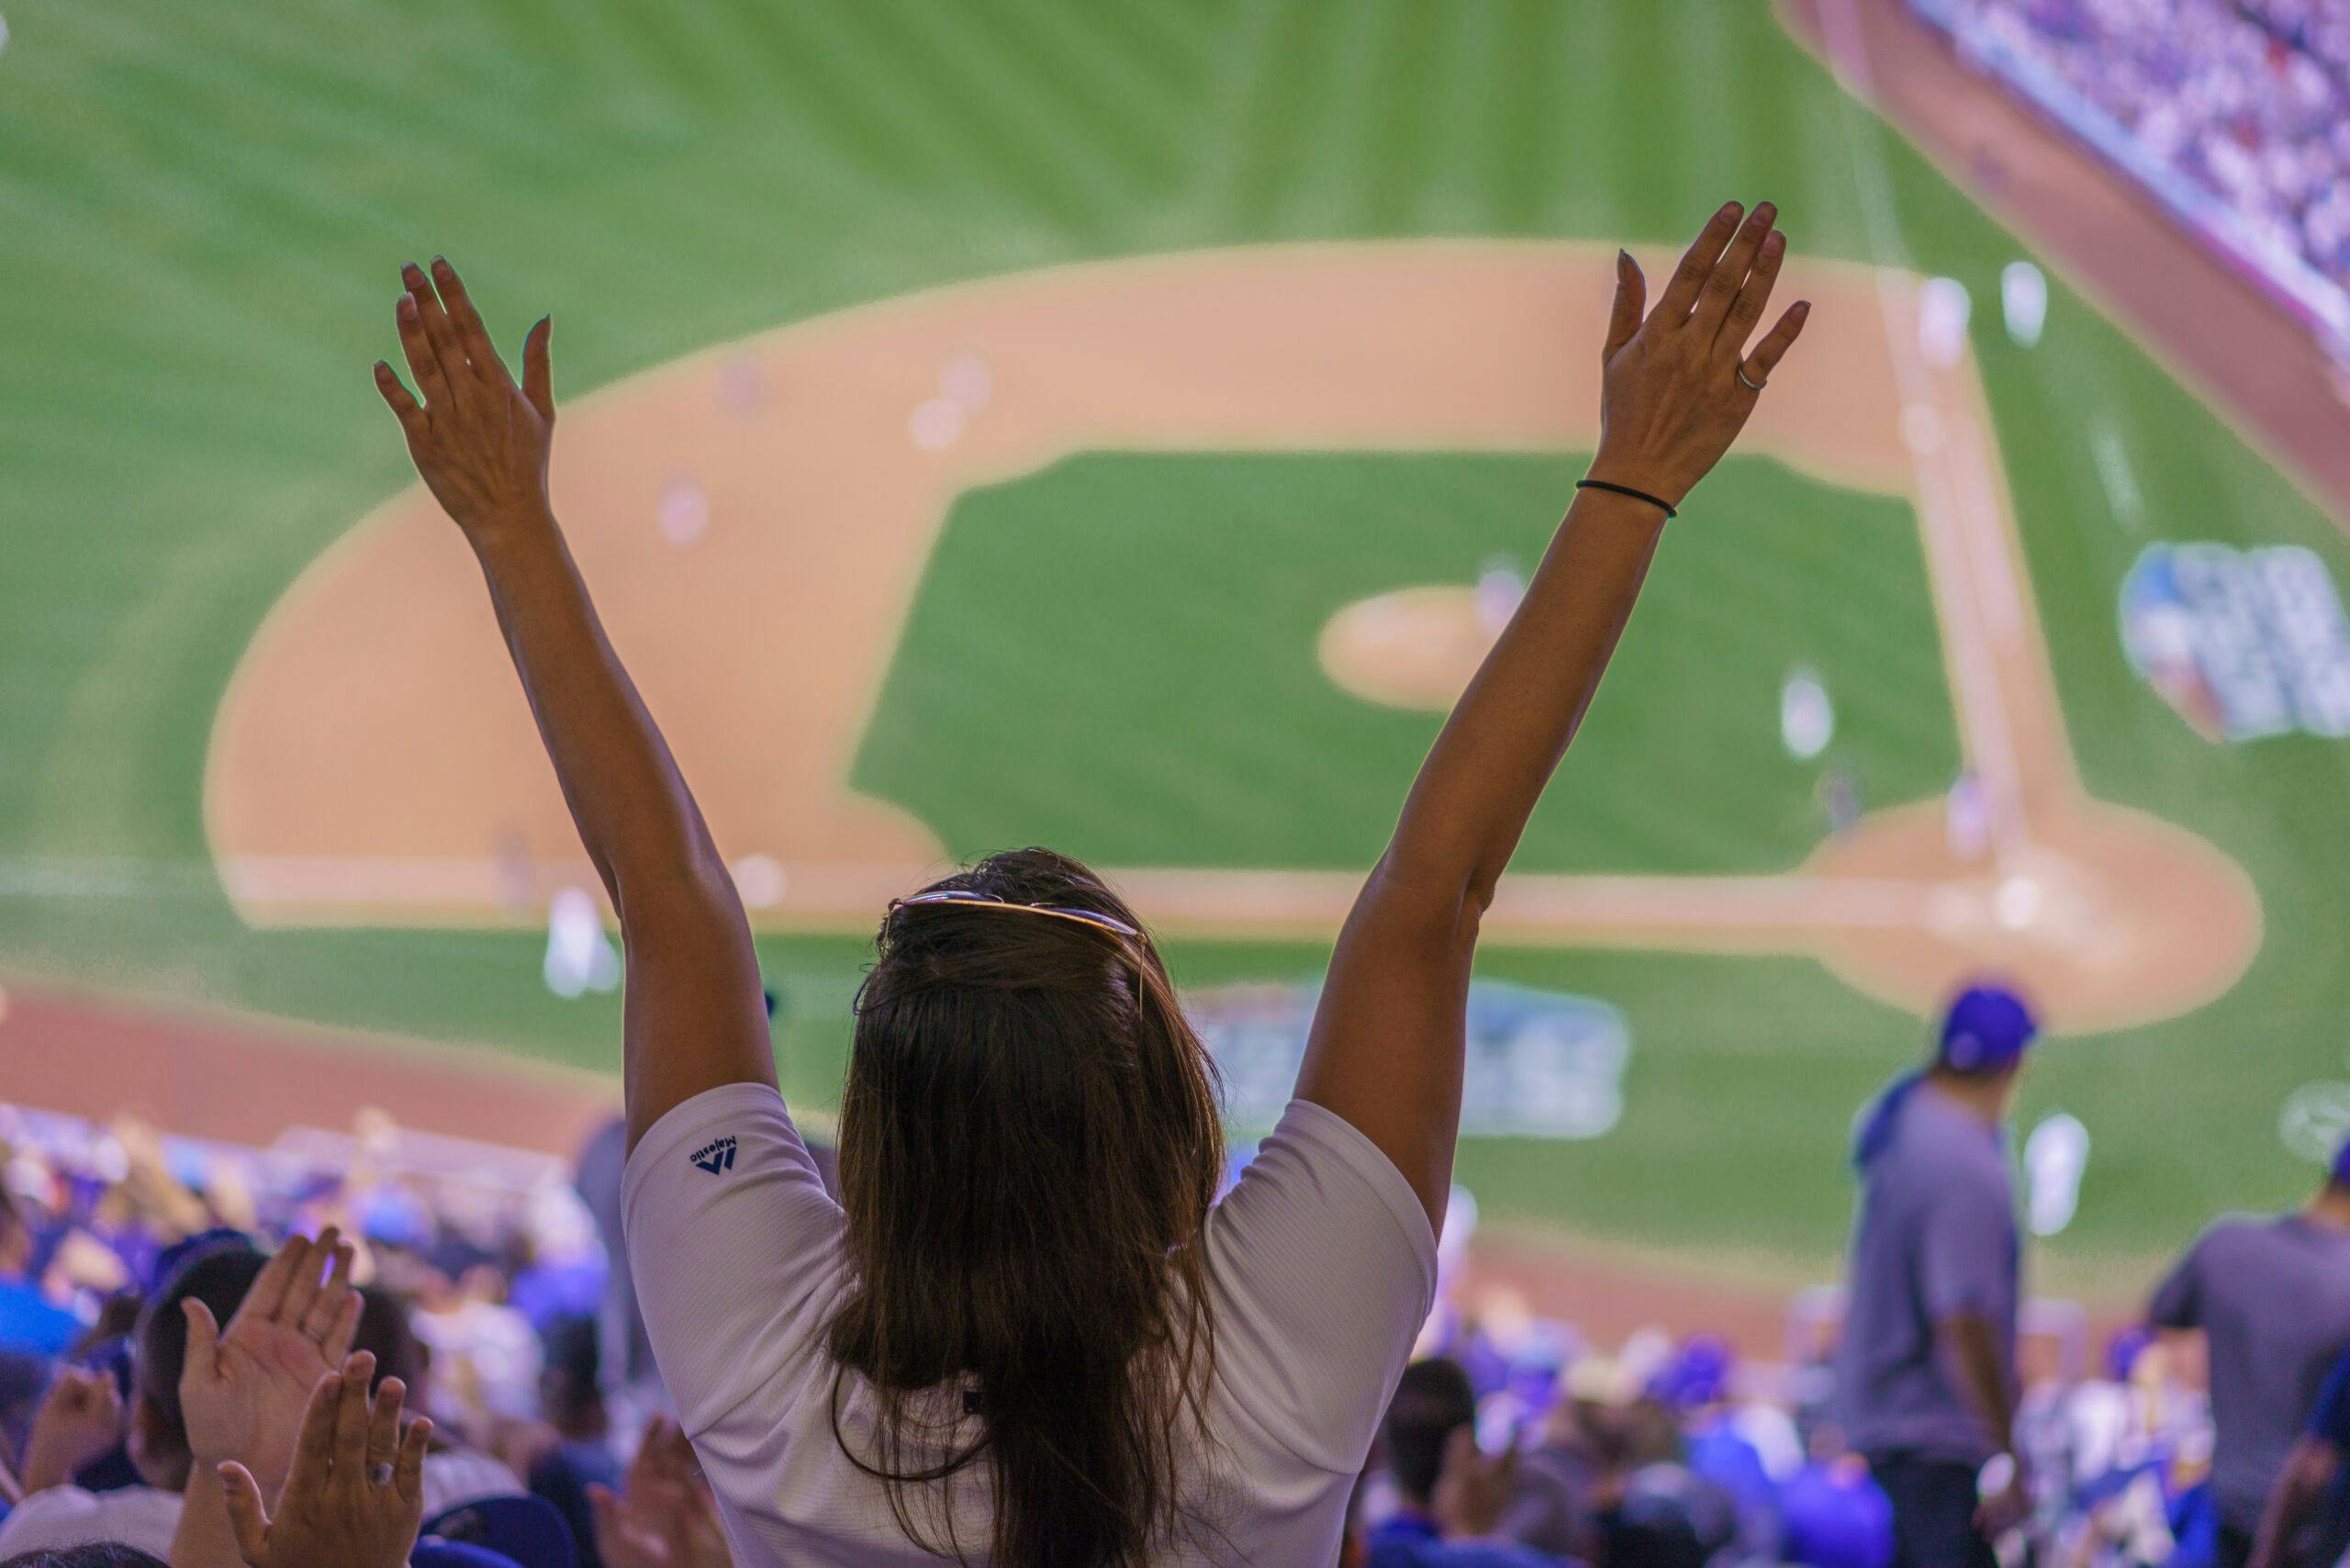 MLB fan jumps up with arms outstretched celebrating